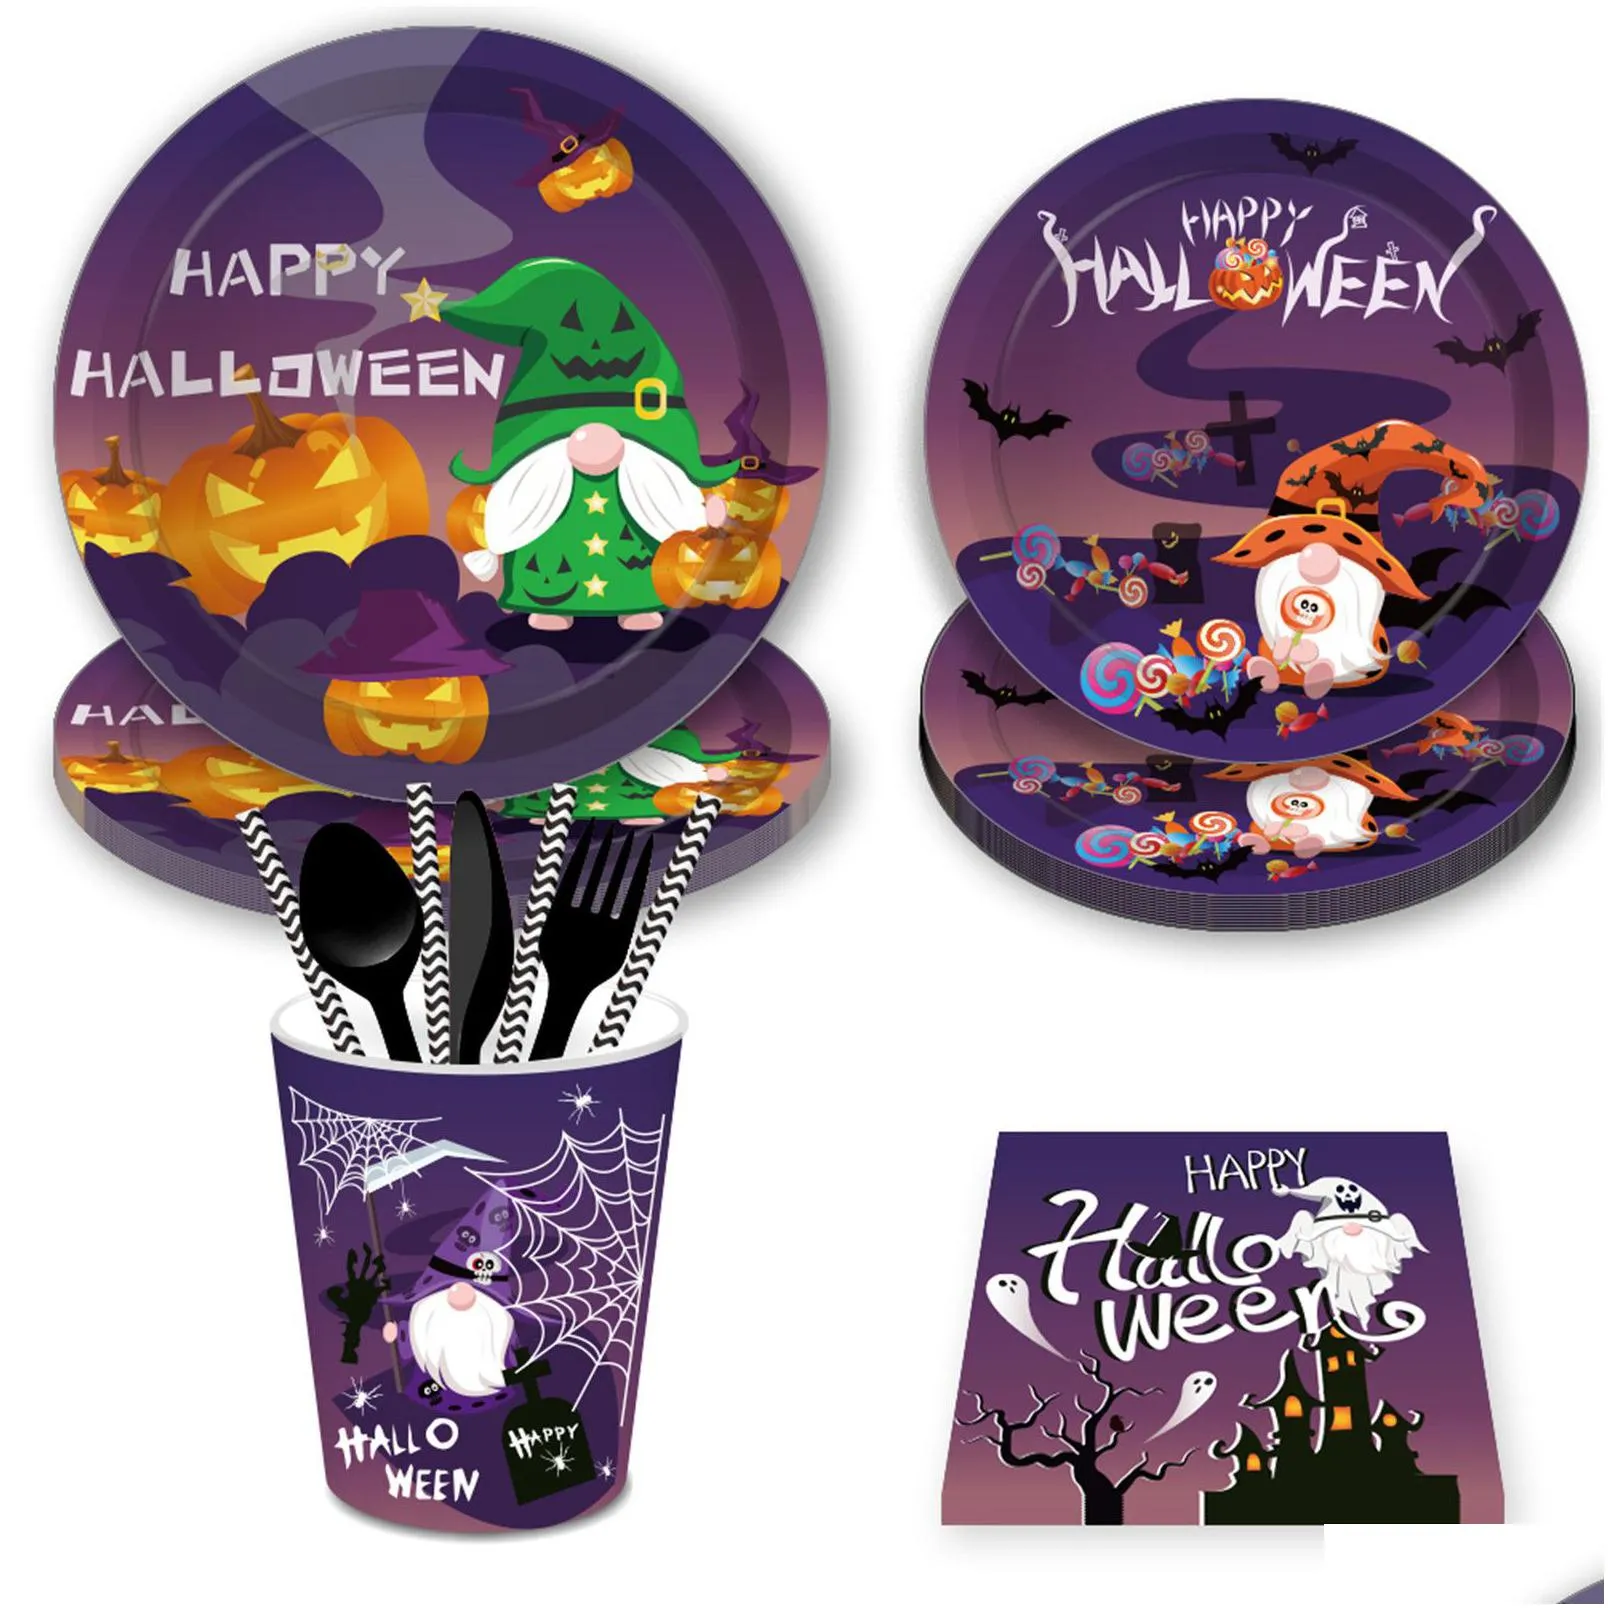 halloween dwarf faceless paper plates party plates and napkins birthday party supplie set party dinnerware serves 8 guests for plates, napkins, cups